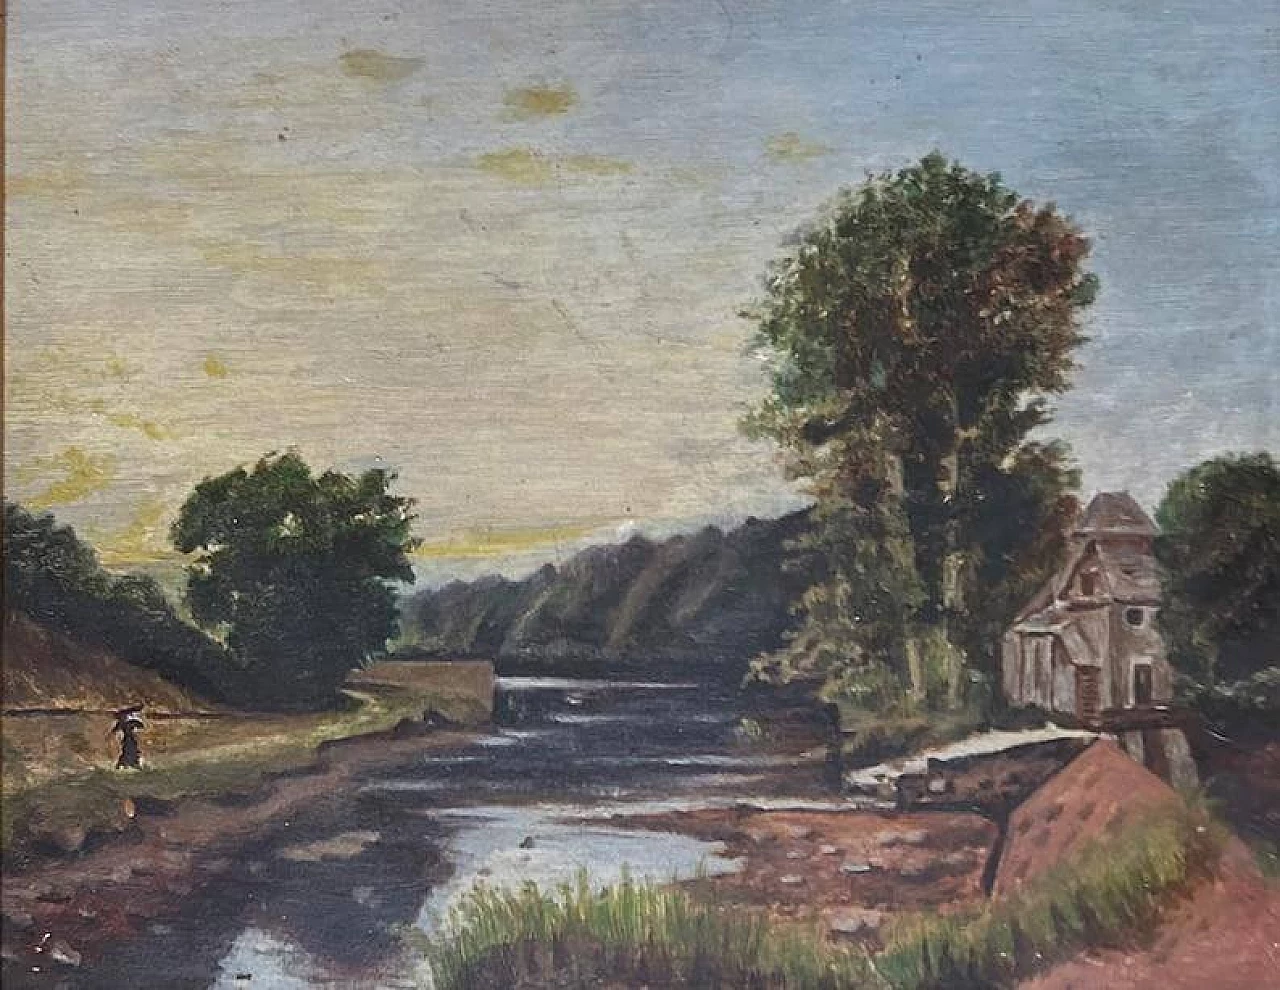 Lake landscape in the style of the Barbizon School, painting, 1920s 1